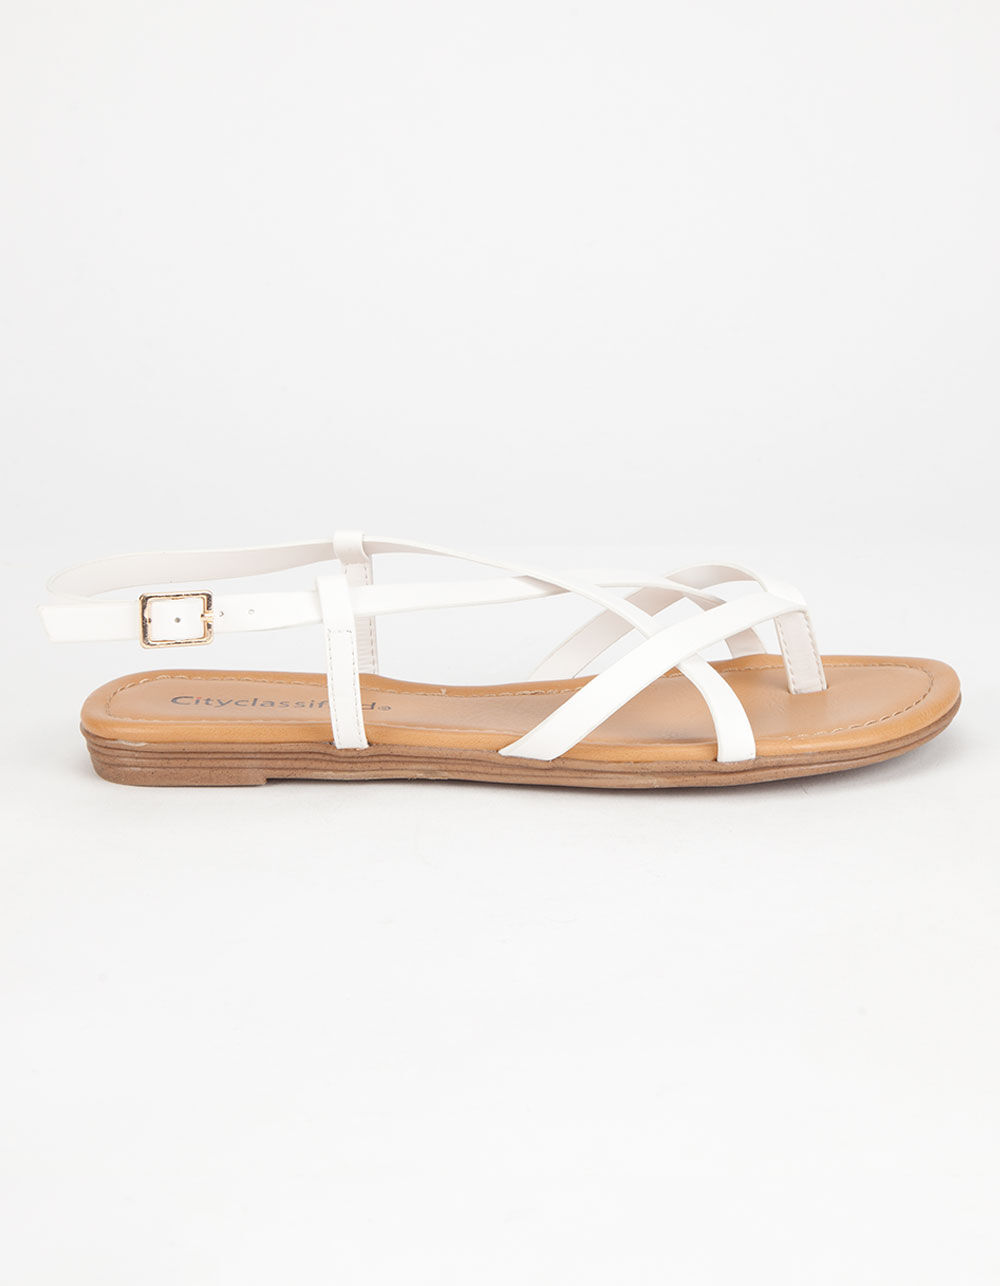 CITY CLASSIFIED Spica Womens Sandals image number 1